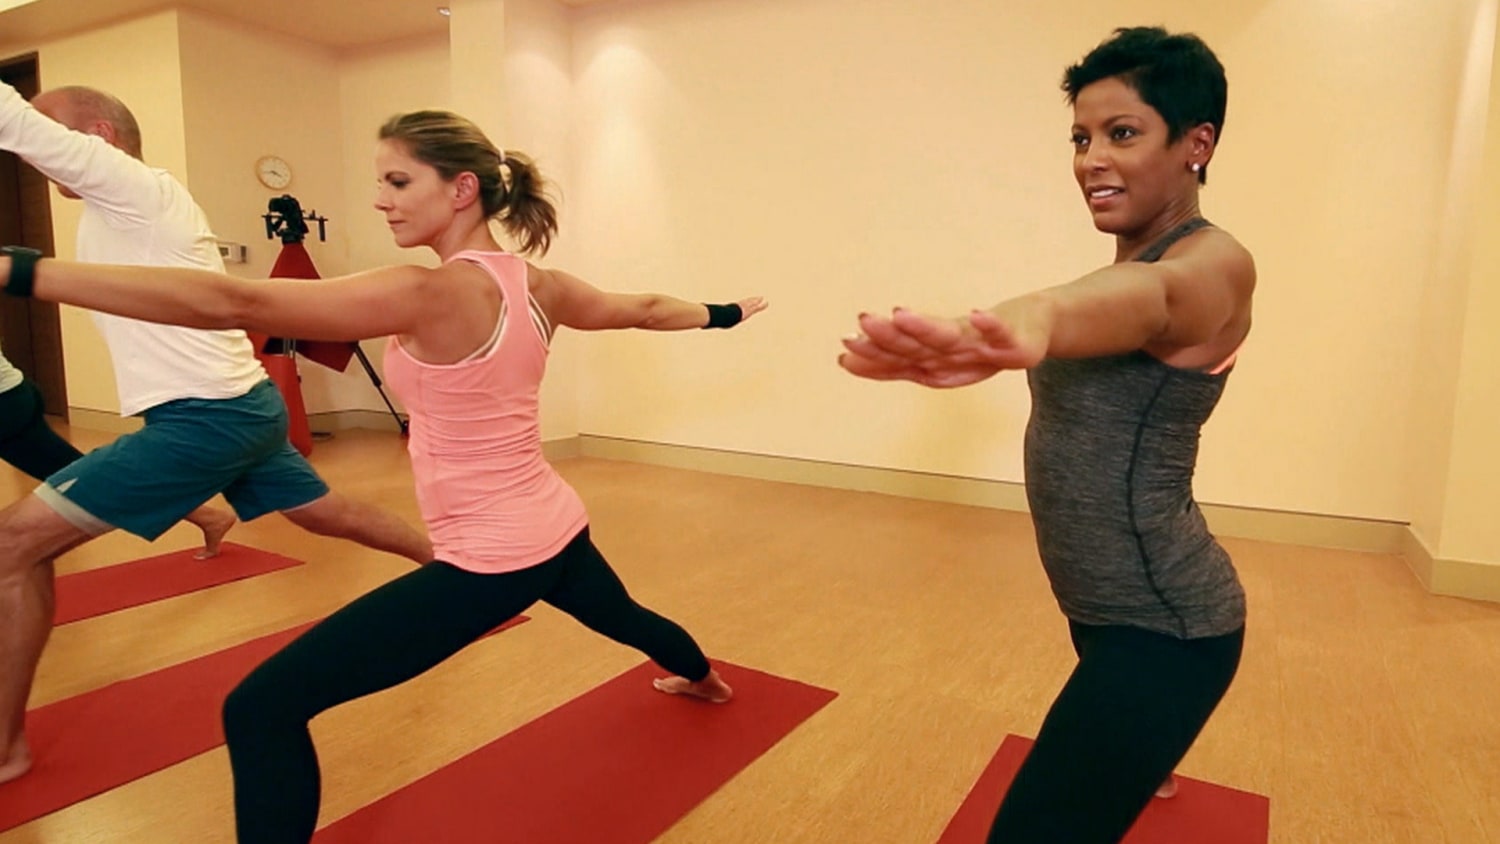 TODAY anchors try hot yoga, the sensation sweeping the US